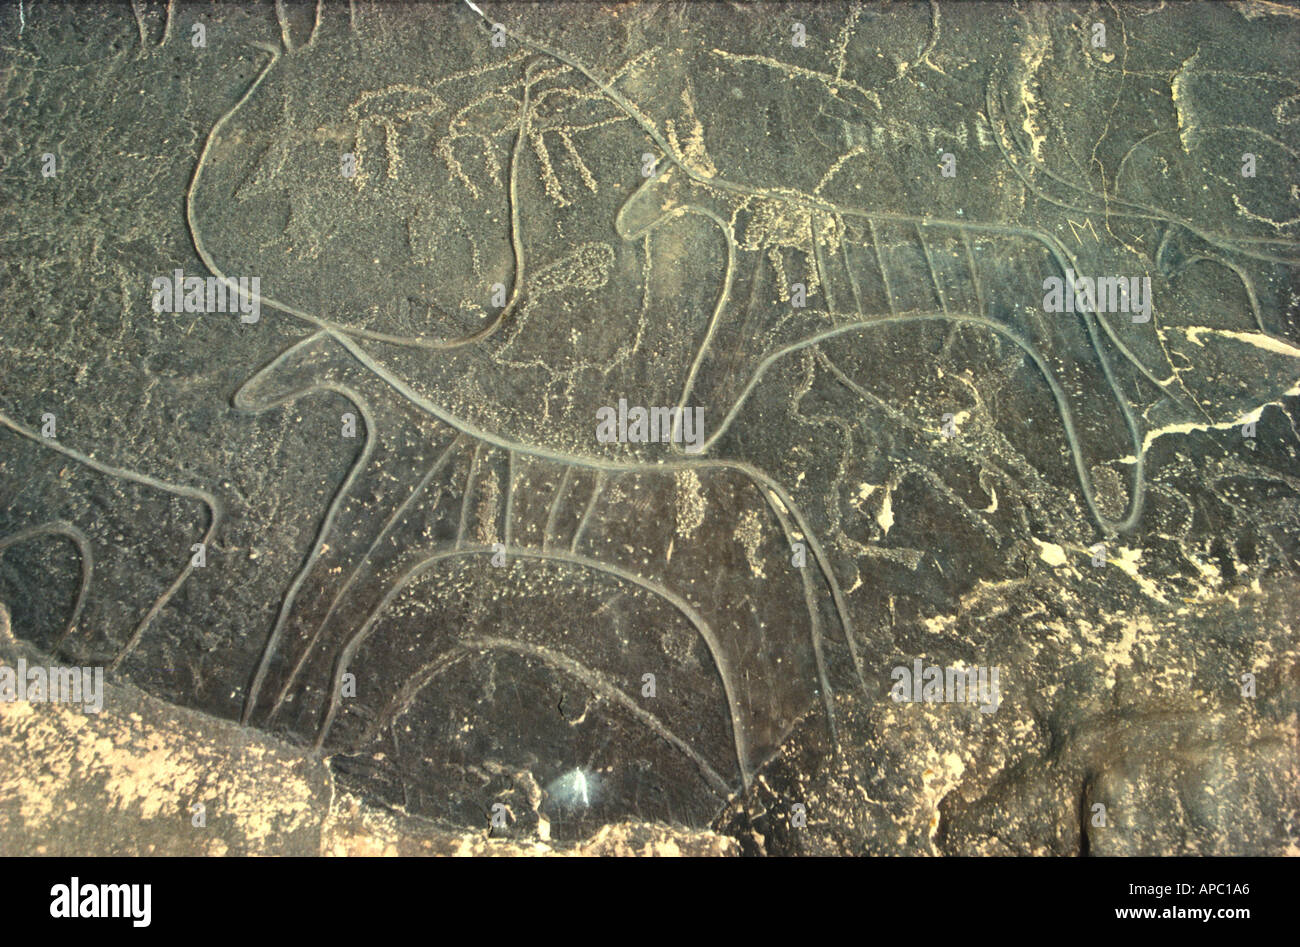 Ancient Rock Etchings of Antelope near Taghit Sahara Desert Algeria North Africa Stock Photo